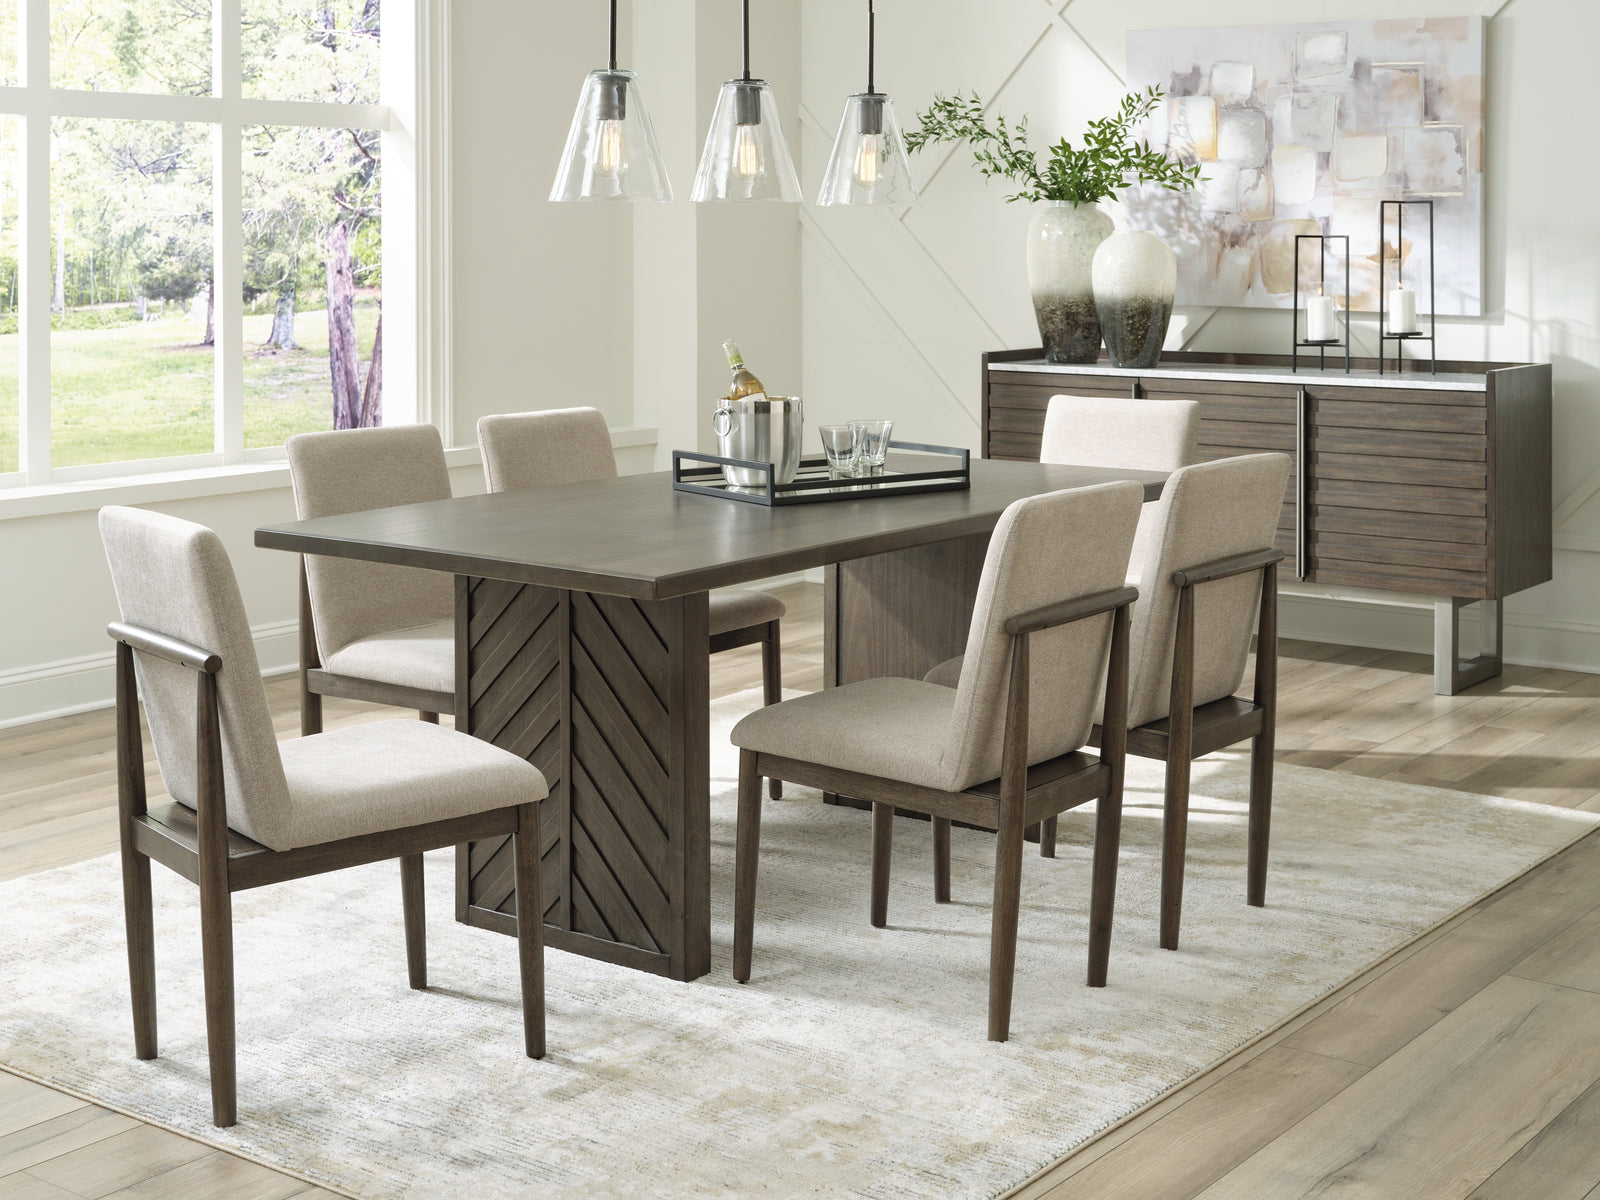 Arkenton Grayish Brown Dining Table And 6 Chairs